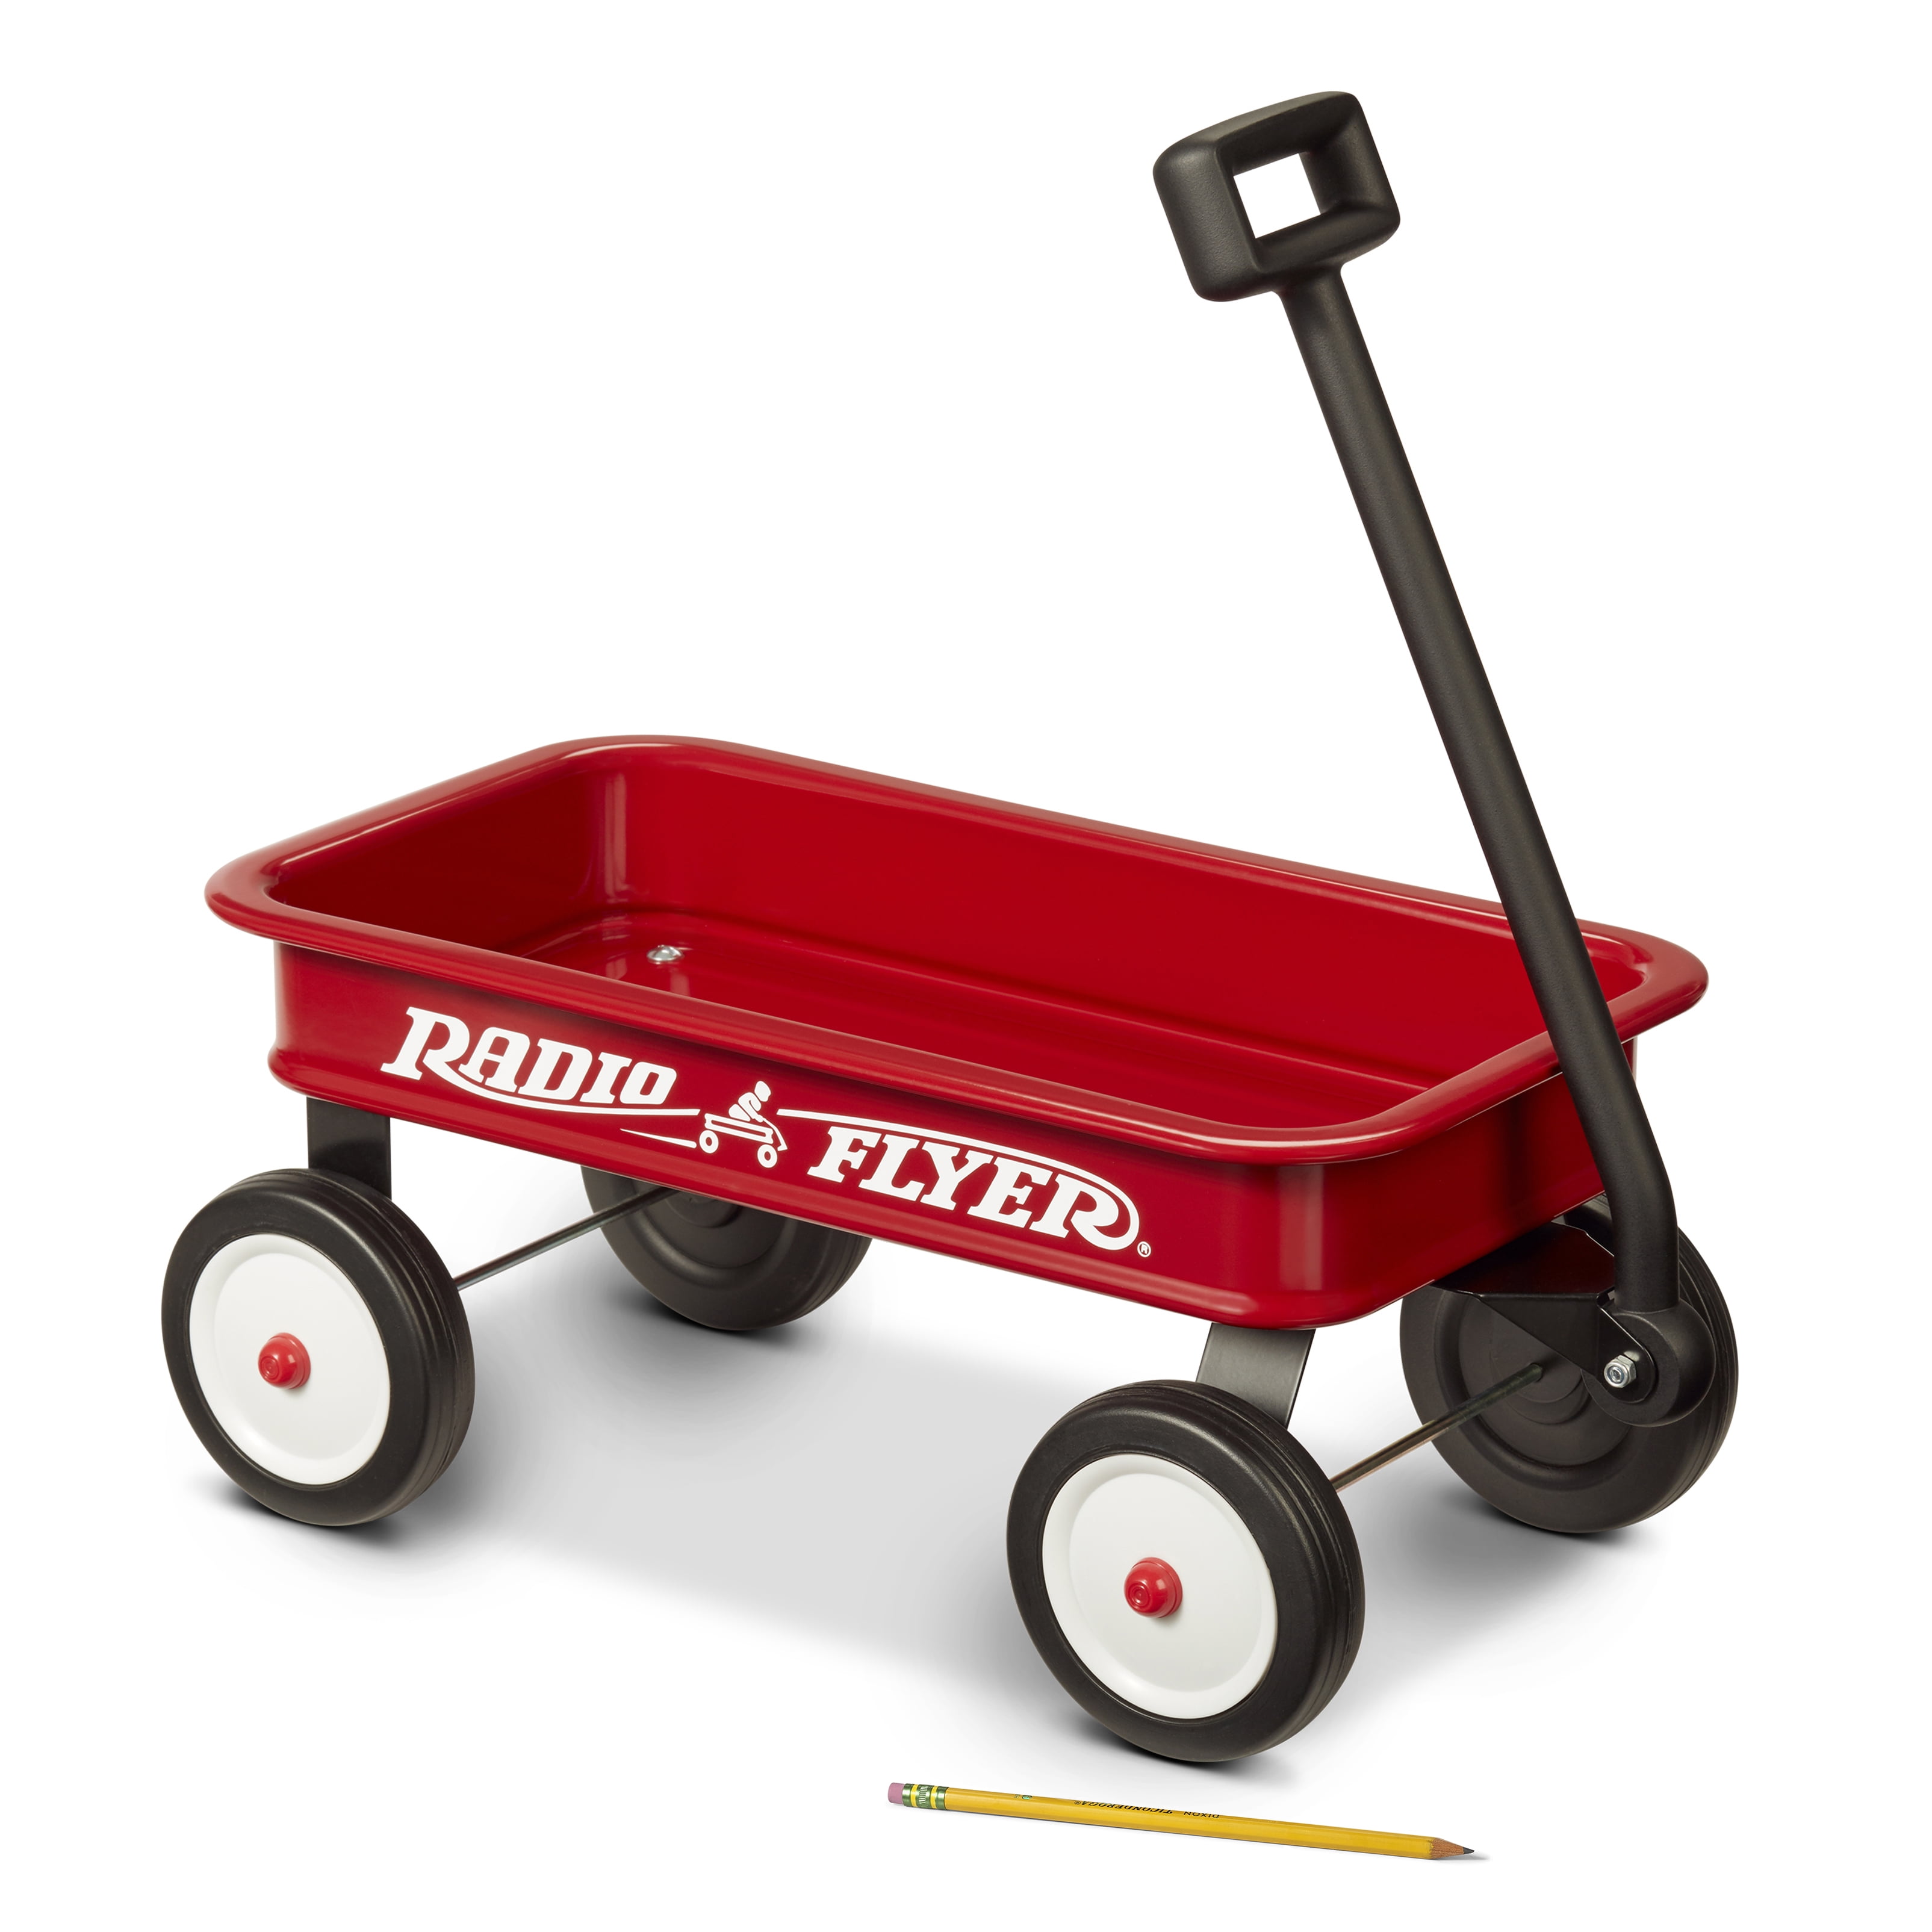 Radio Flyer My 1st 2-in-1 Red for sale online Wagon Ride 607X 